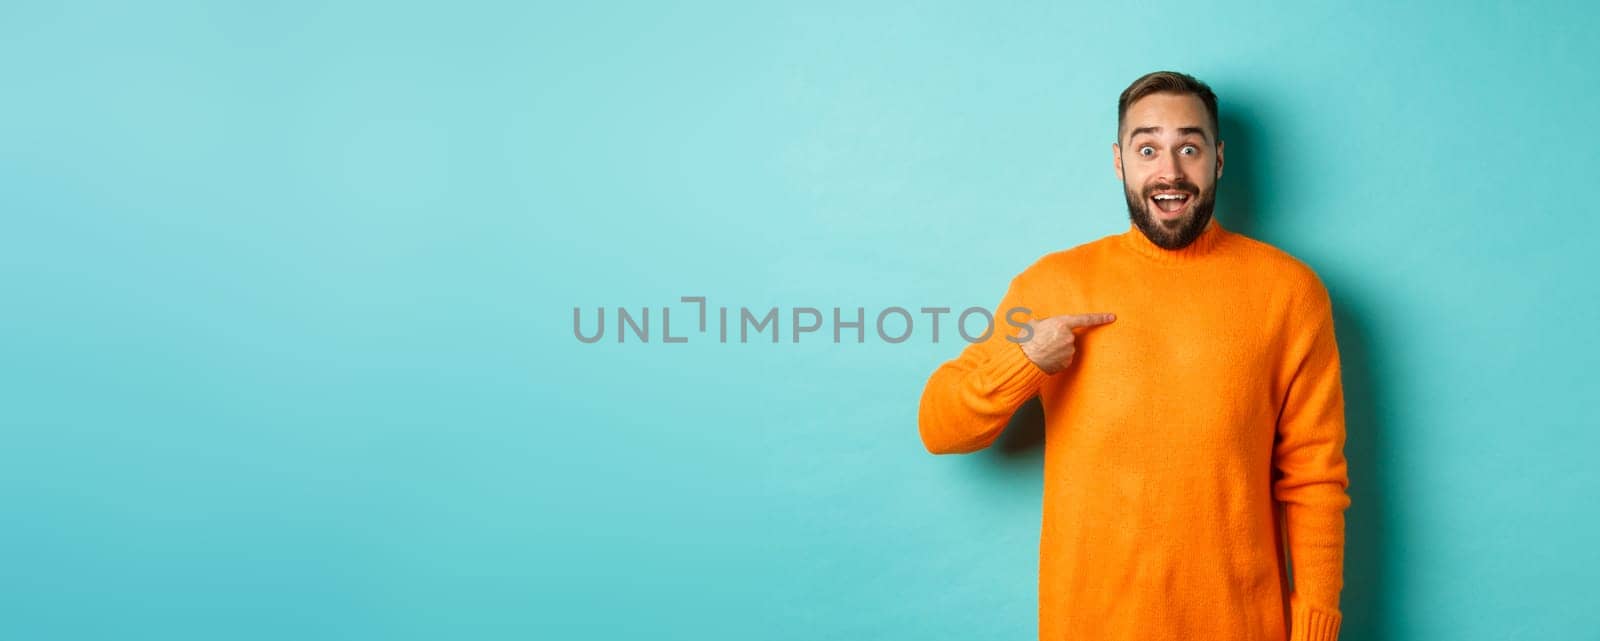 Excited man pointing at himself, looking amazed and happy, being chosen, standing over light blue background.